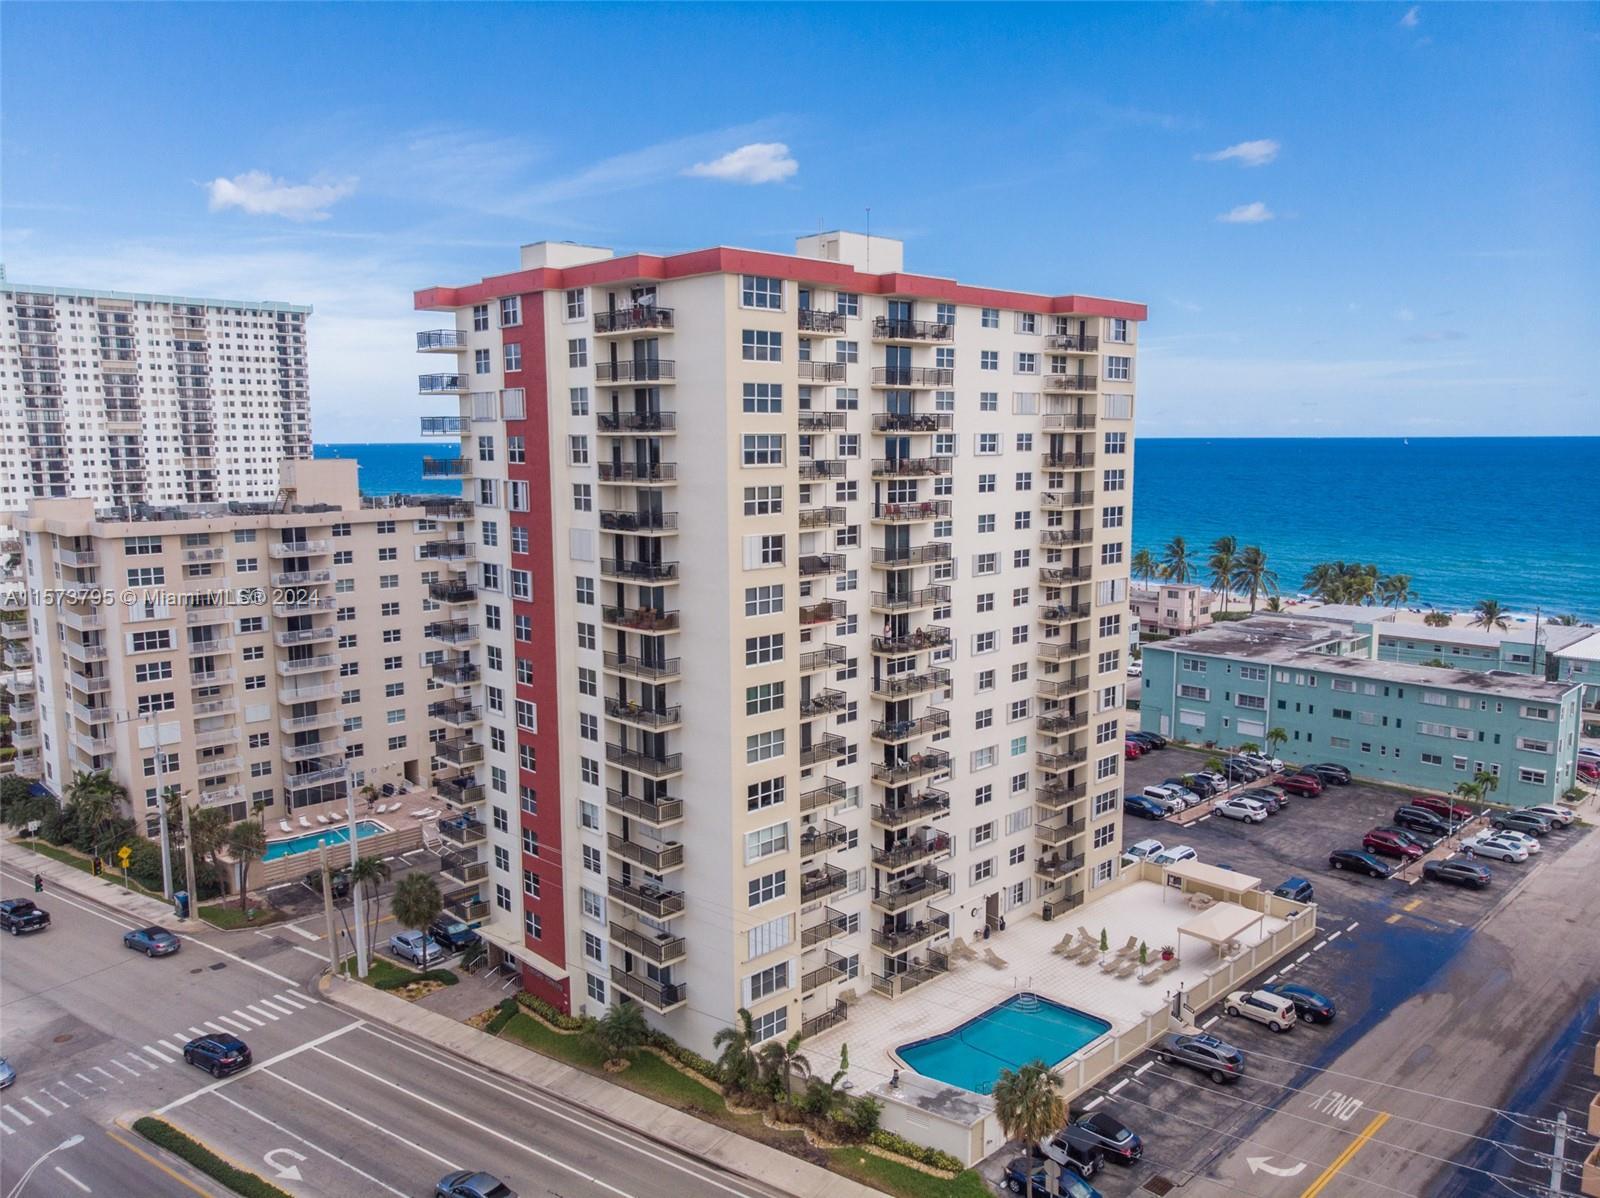 Photo of 1501 S Ocean Dr #1205 in Hollywood, FL